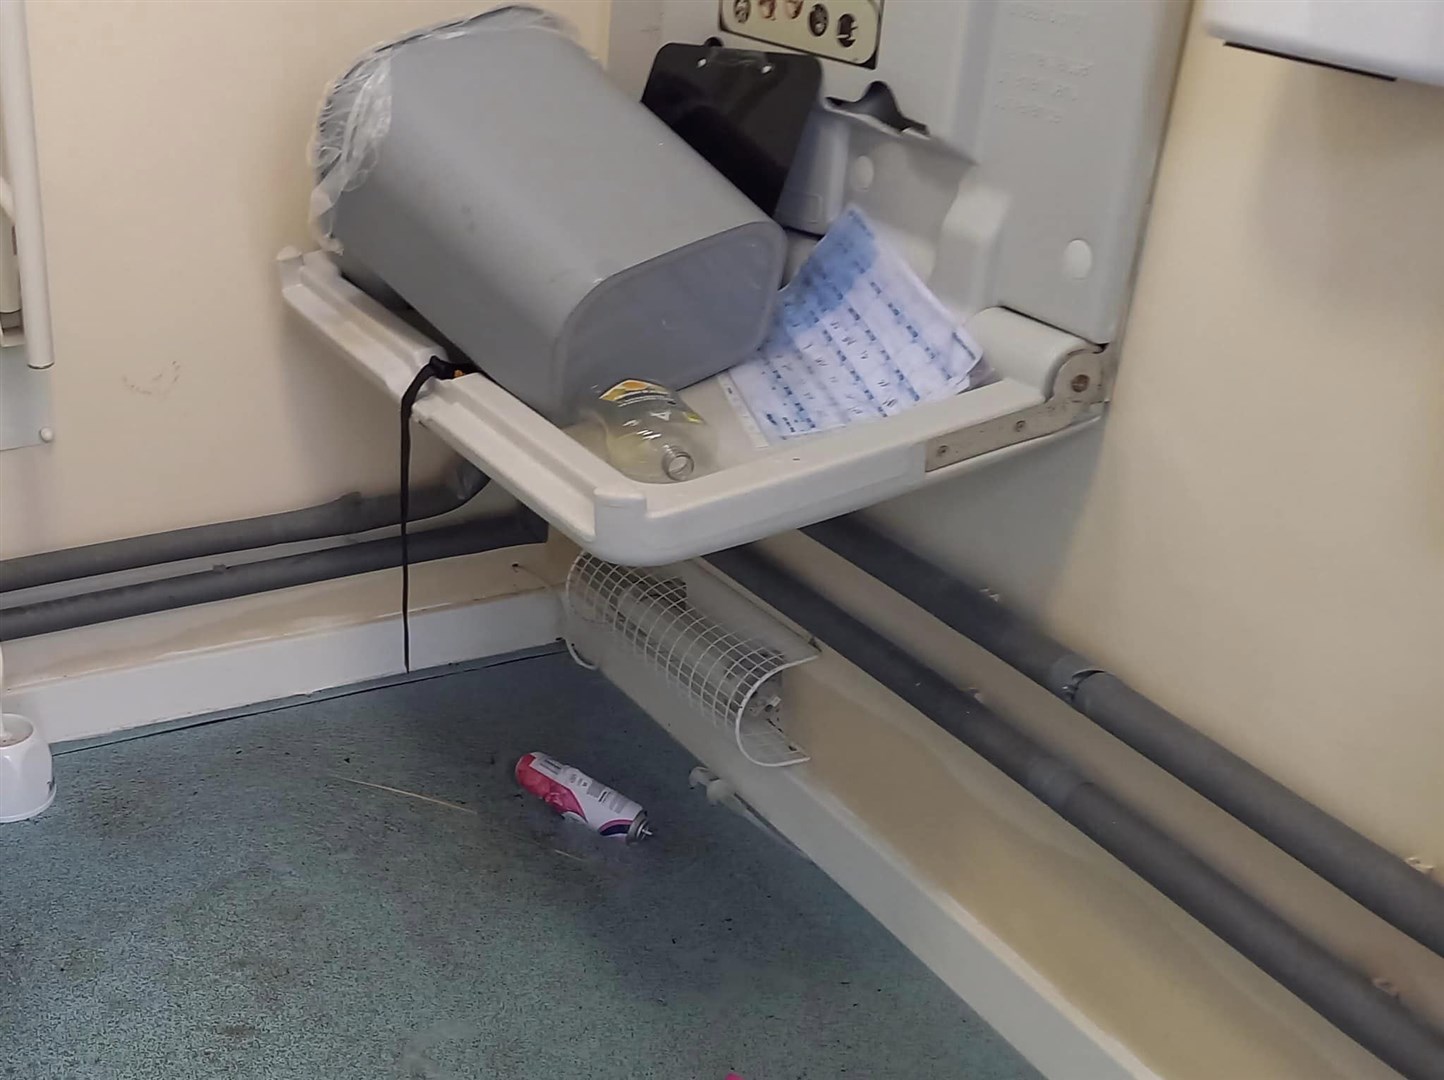 A baby changing table was targeted at the toilets in North Kessock.